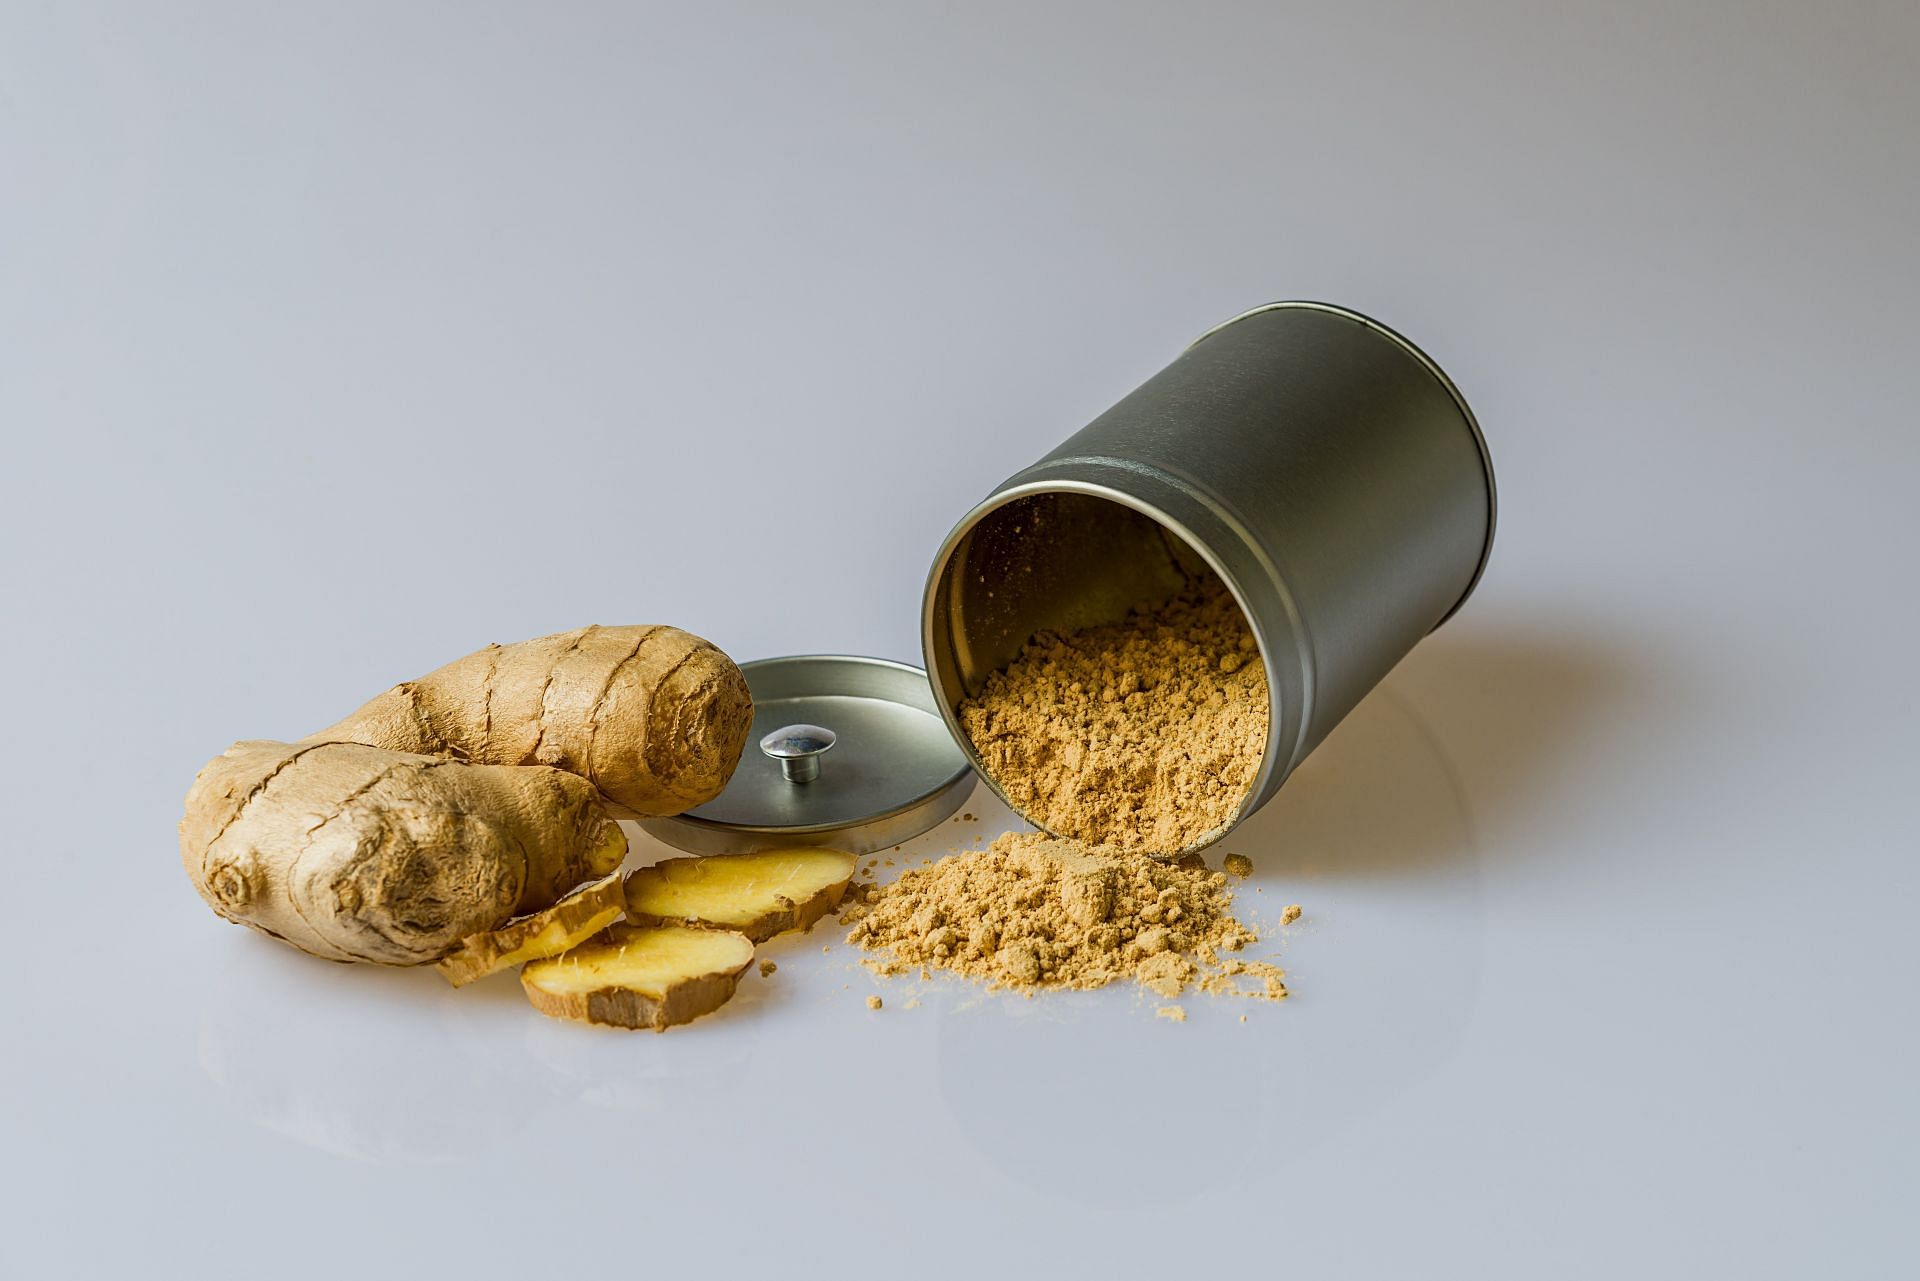 Ginger tea is a great way to get relief from constipation. (Image via Pexels/Pixabay)